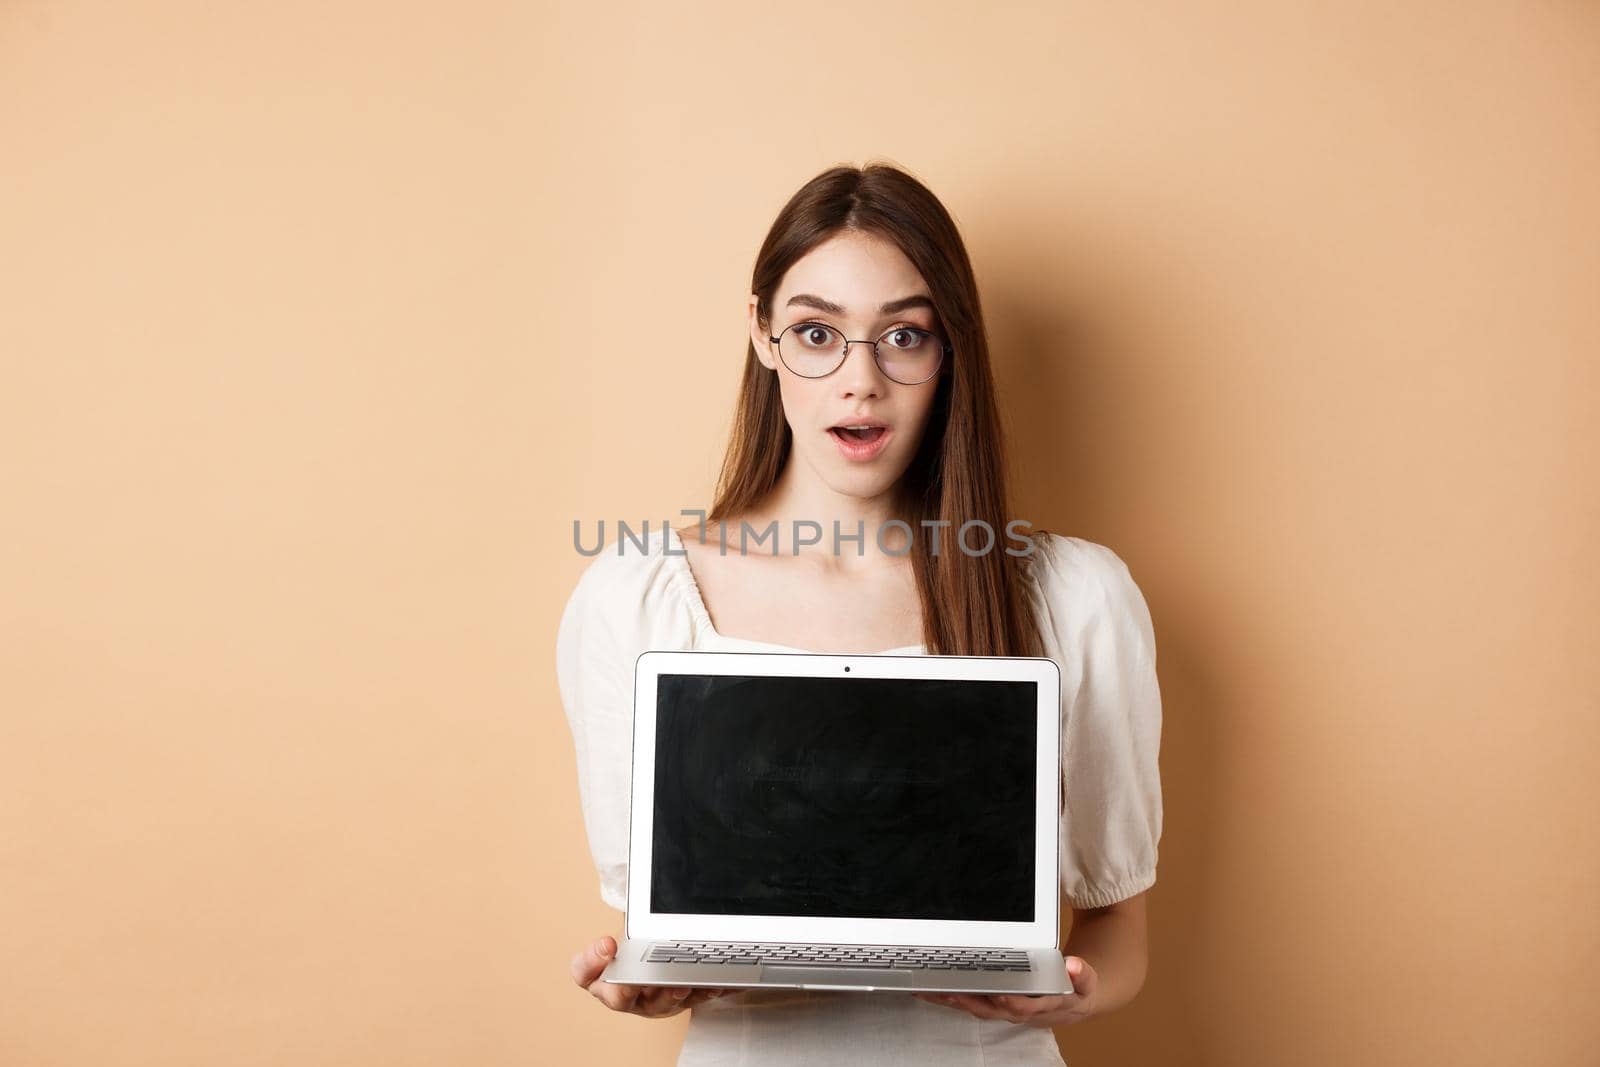 Surprised young woman in glasses showing laptop screen with amazed face, standing on beige background.